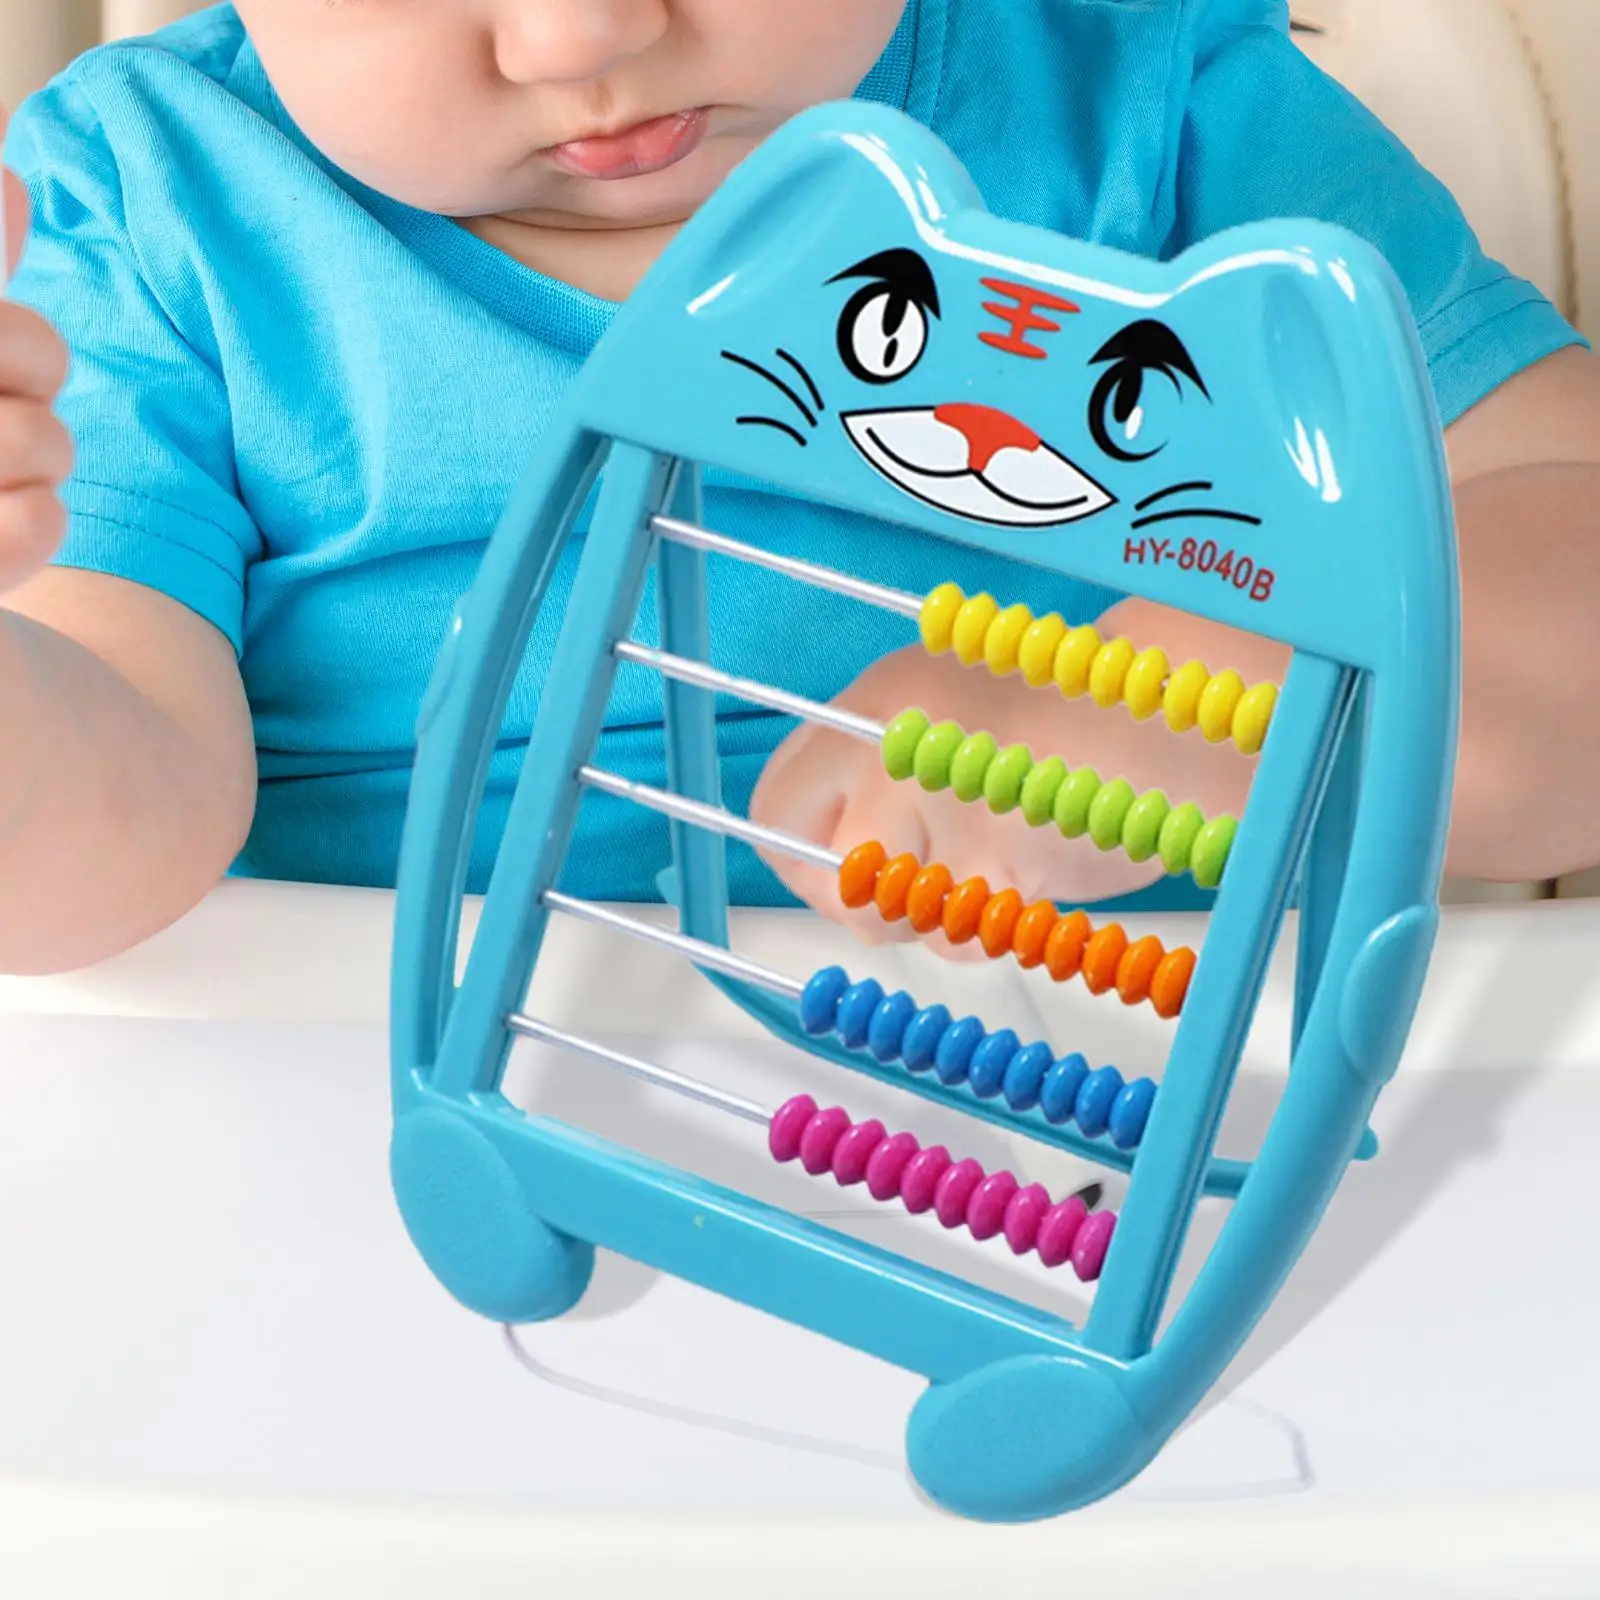 Abacus Educational Counting Frames Toy Math Learning Toy Counting Rack 5 Row Frame Abacus for Children Boy Toddlers Girls Gifts